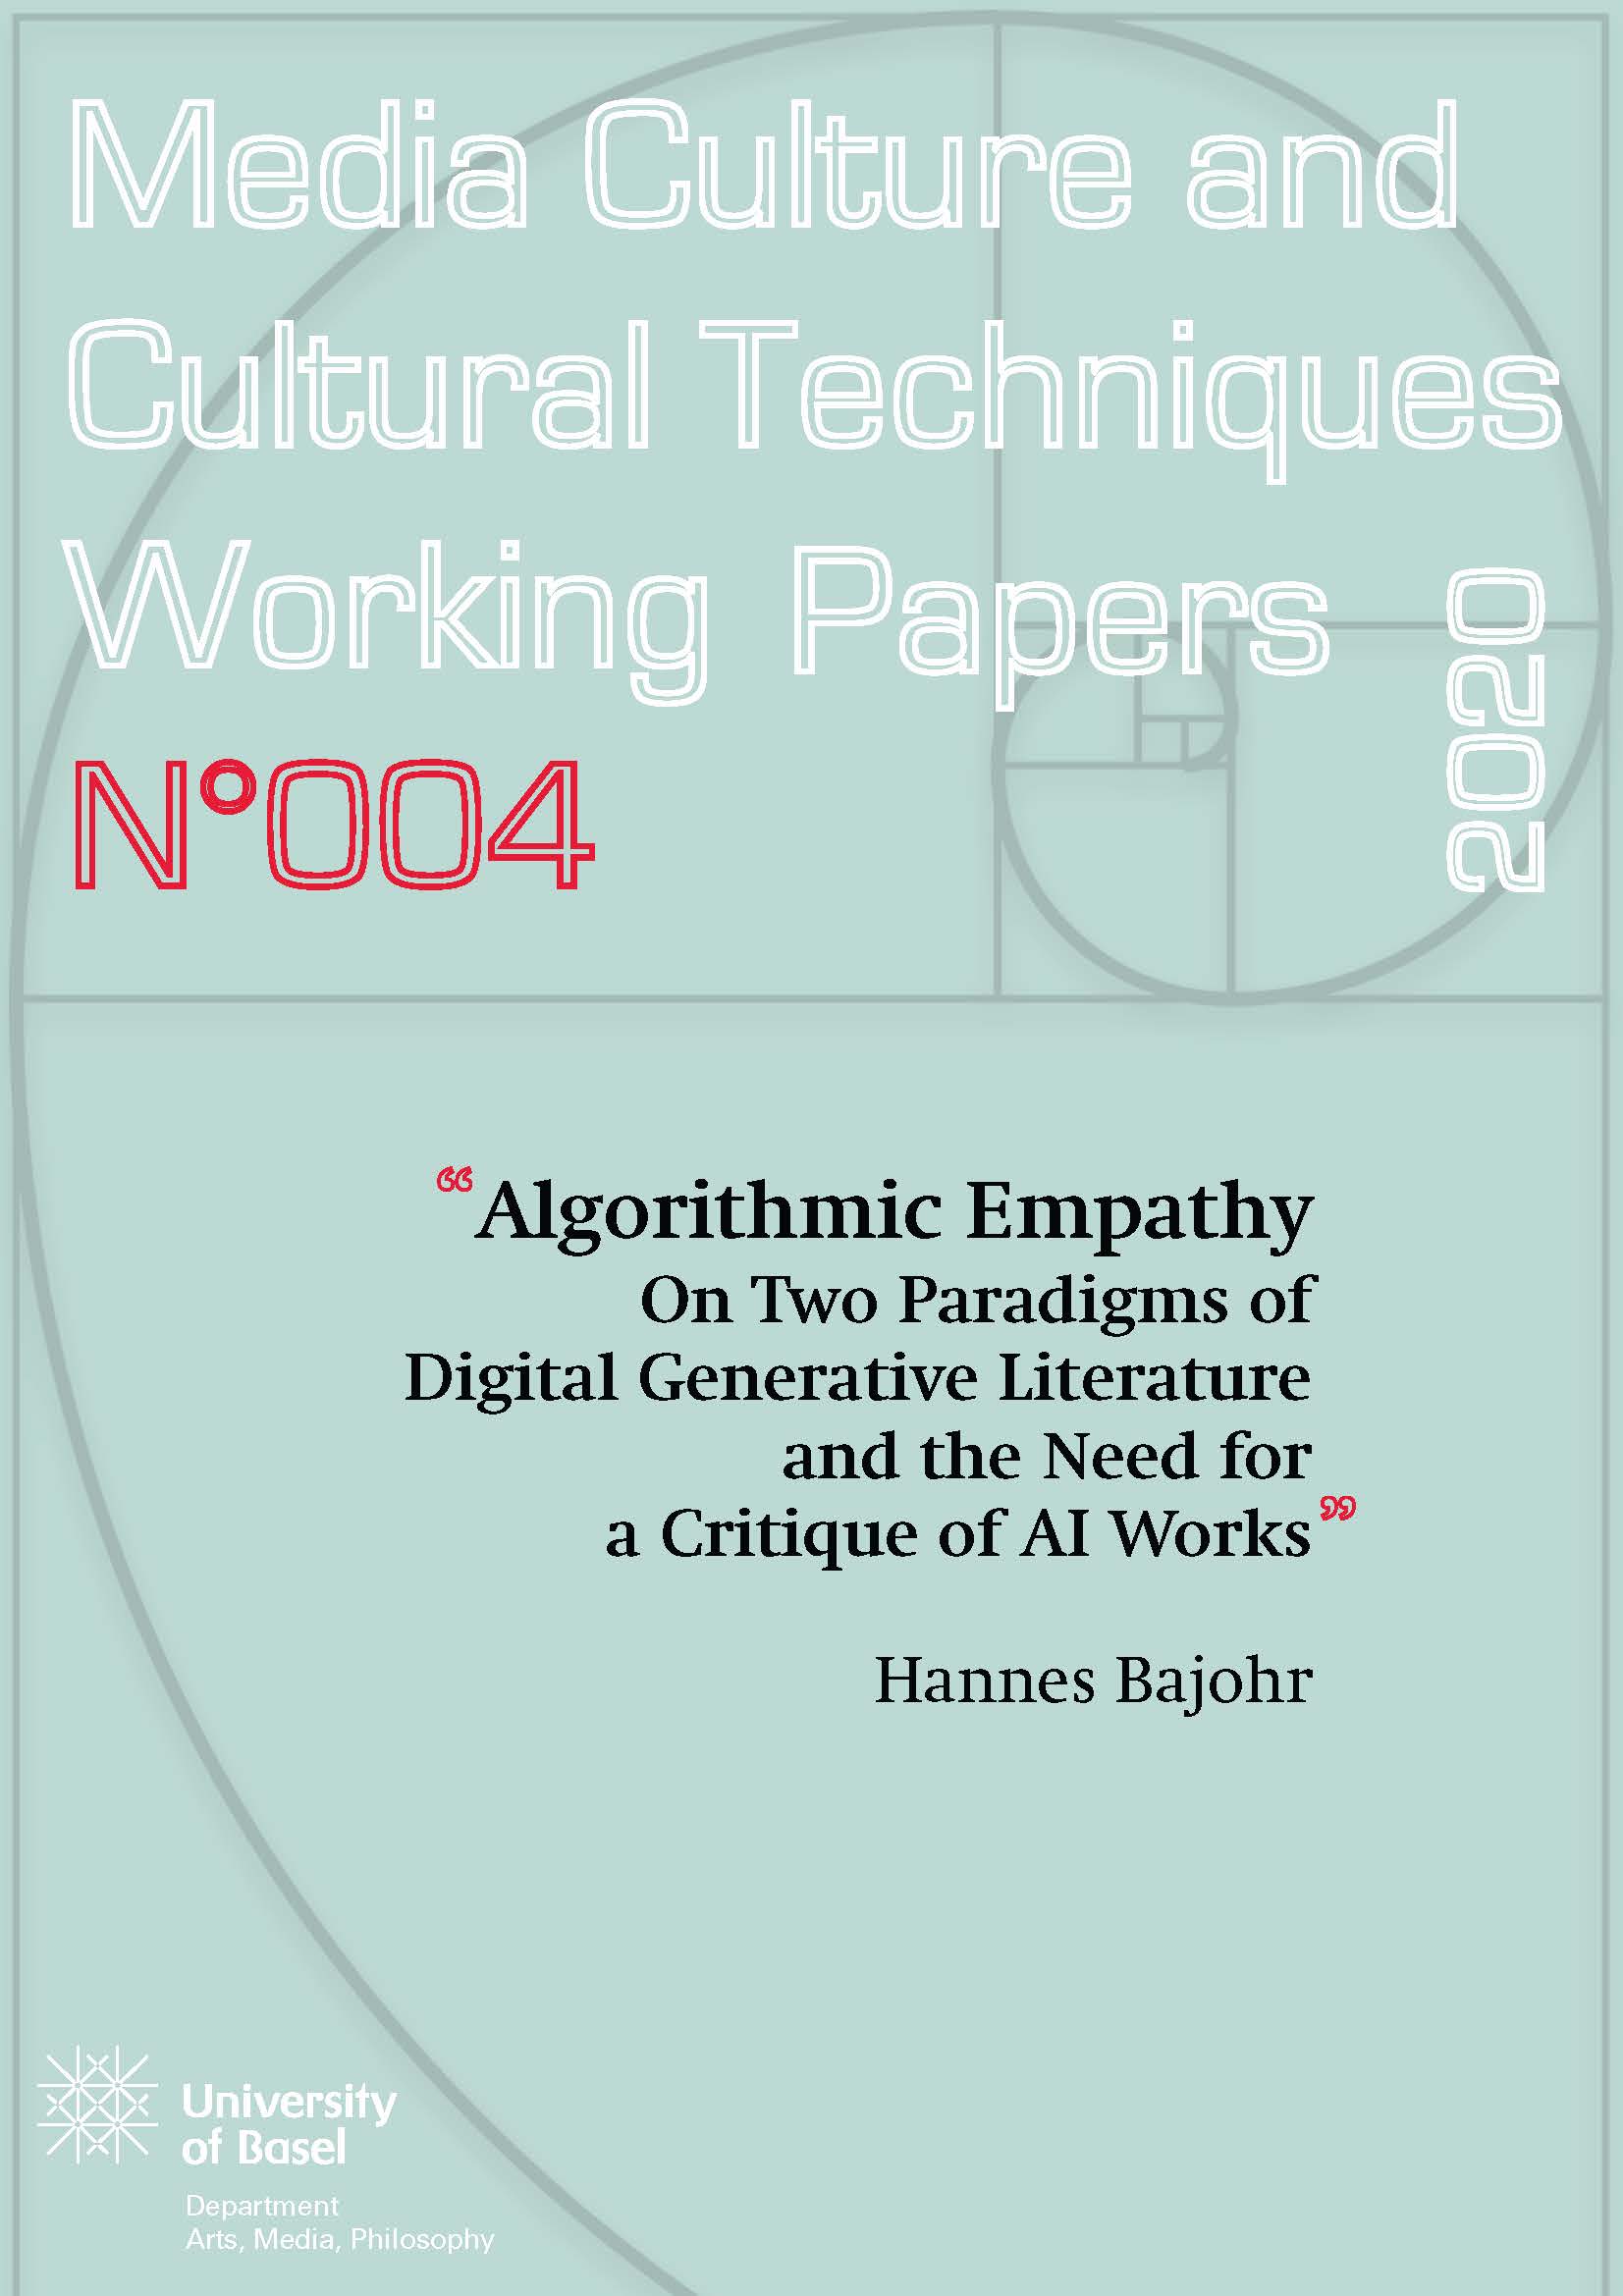 Algorithmic Empathy On Two Paradigms of Digital Generative Literature and the Need for a Critique of AI Works Papers “